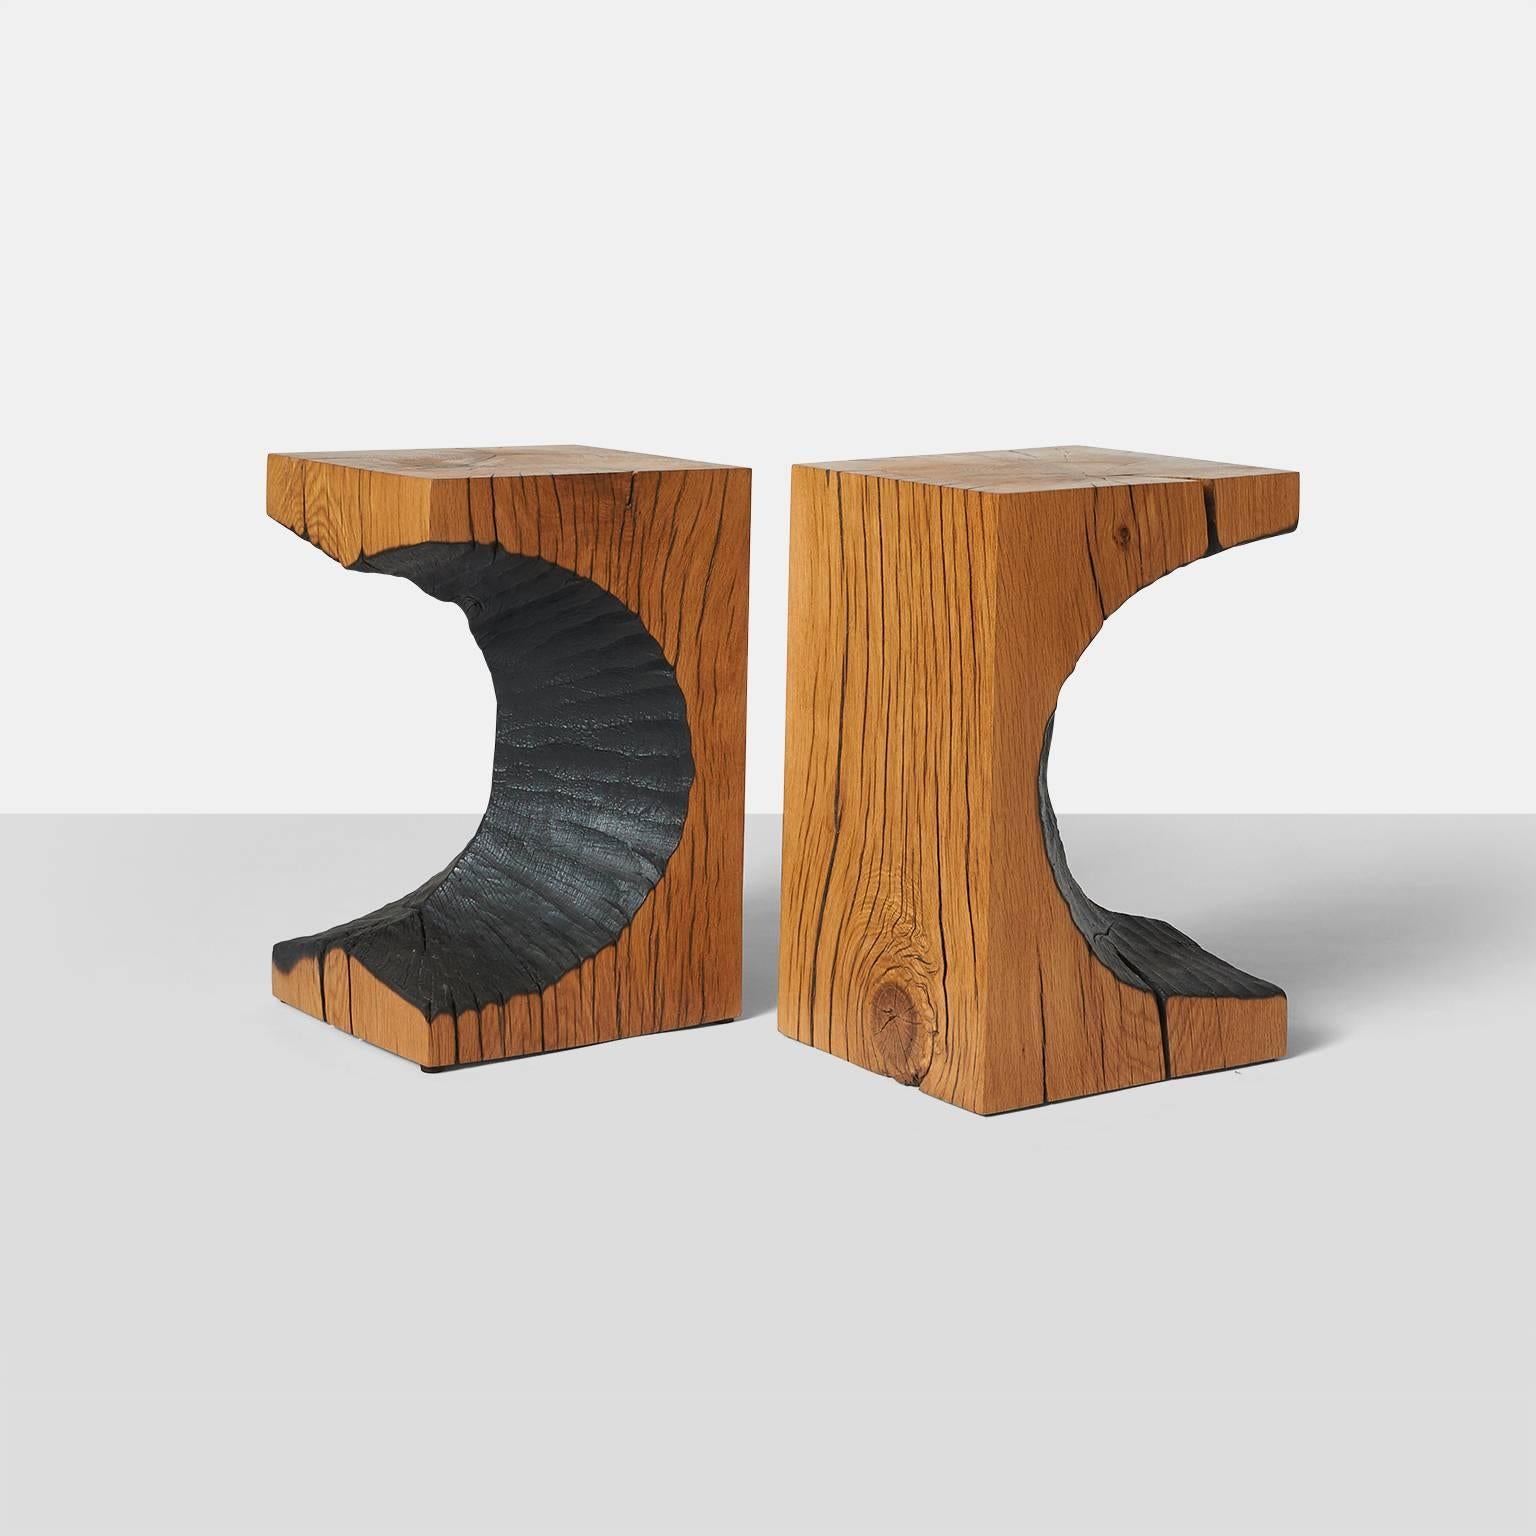 A pair of oak side or coffee  tables made by German artist Kaspar Hamacher from a solid piece of oak.  The center of the trunk has been carved out to create a circular pattern and the finish is blackened.  The oak is from naturally fallen trees,